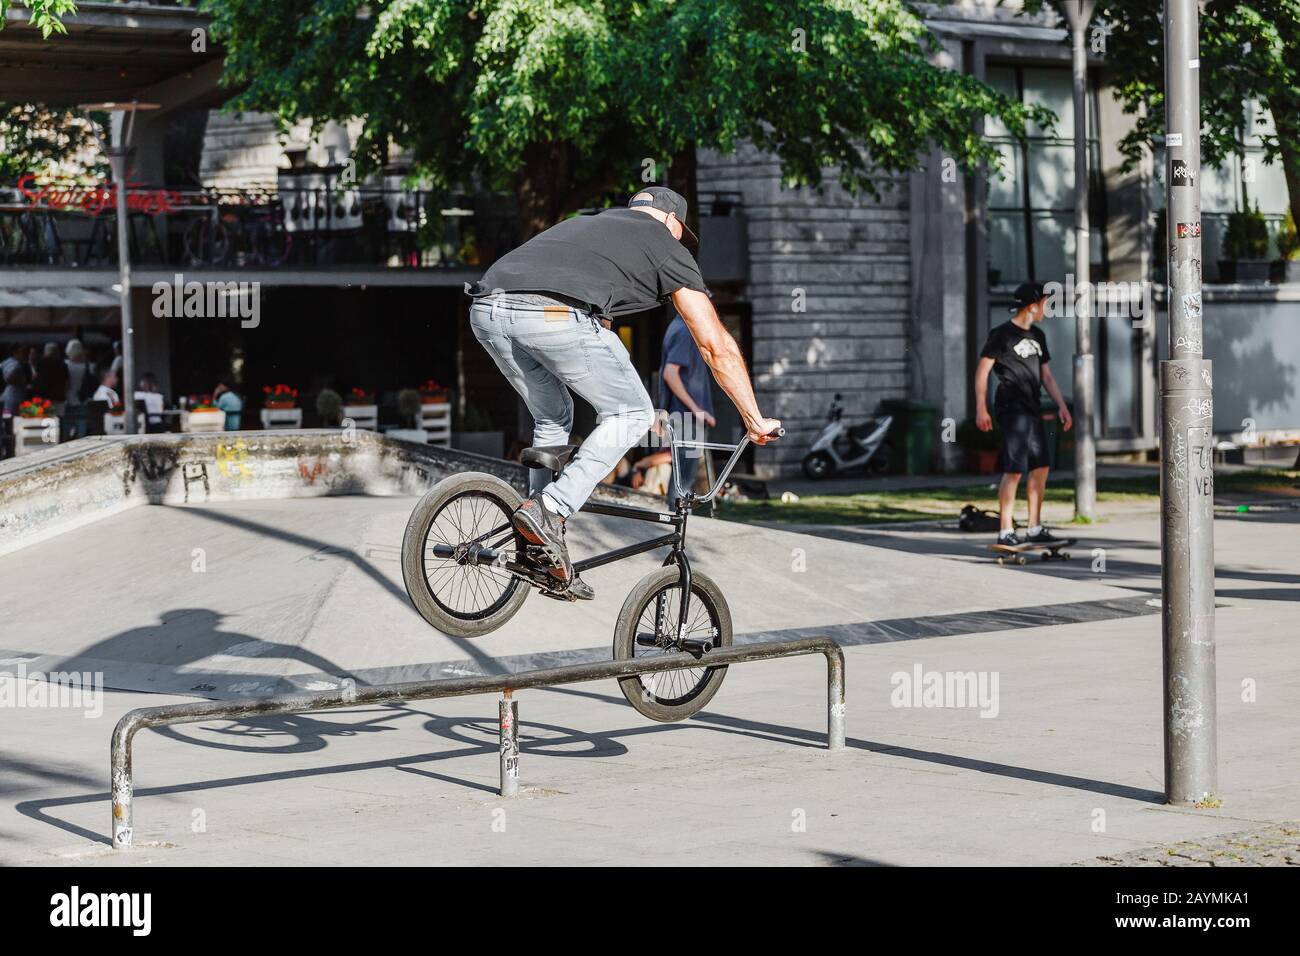 13 MAY 2018, BUDAPEST, HUNGARY: Man performs a stunt with bmx bicycle at  the ramp on a skatepark in the city park Stock Photo - Alamy